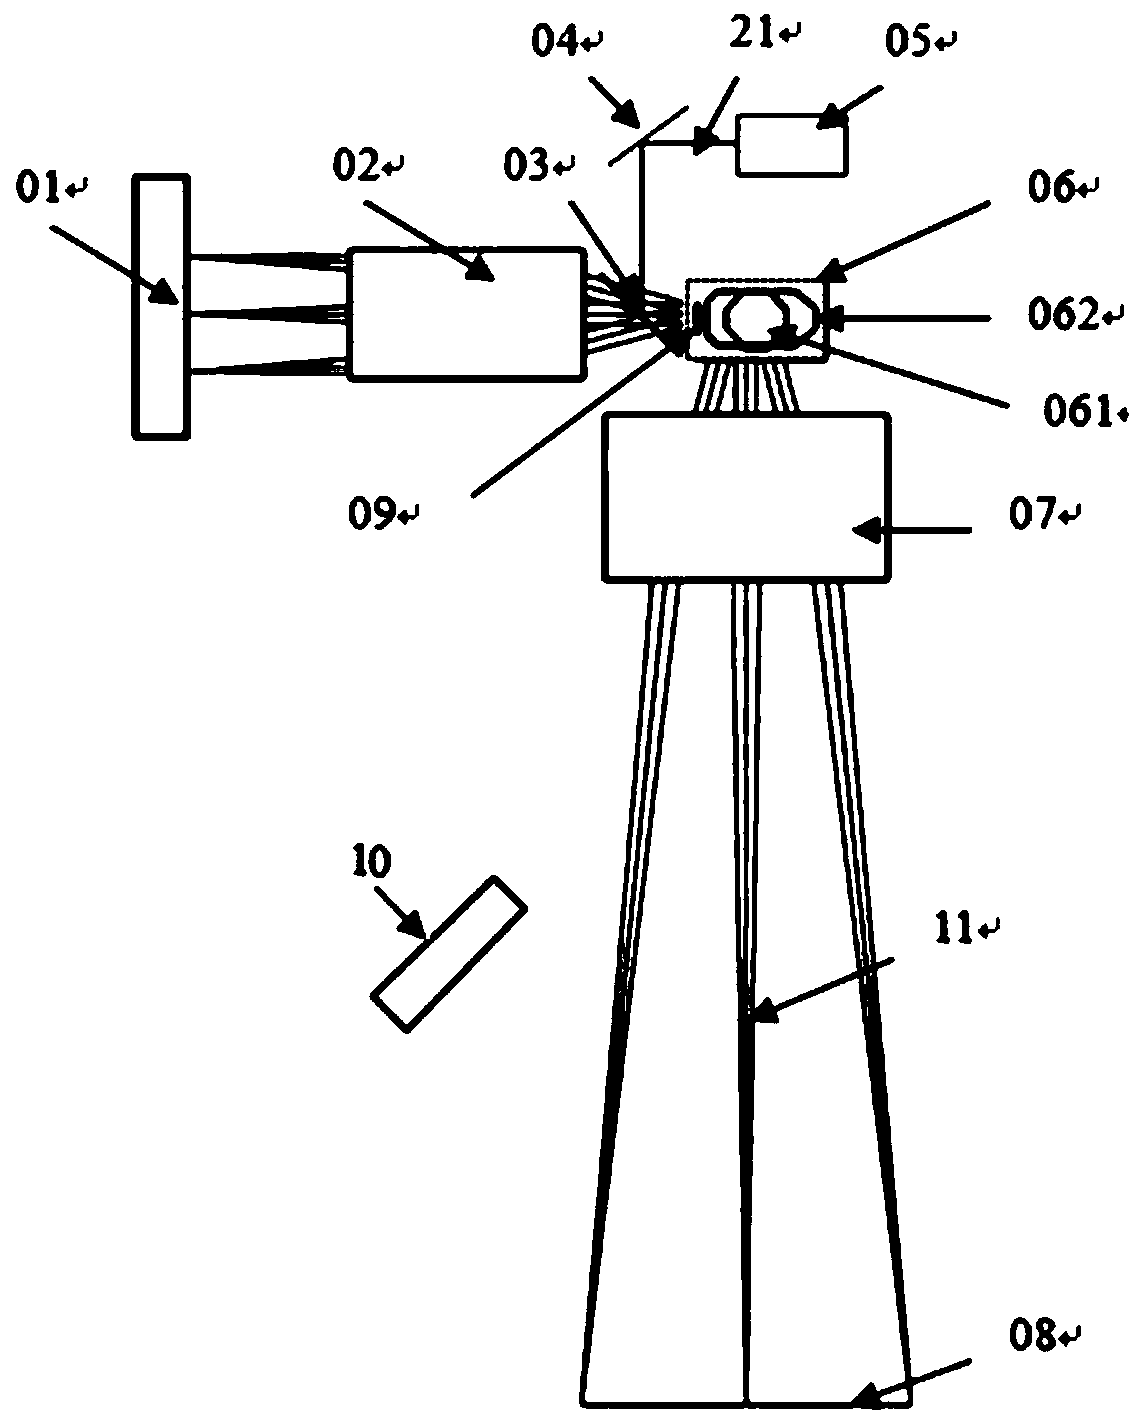 Large field-of-view galvanometer coaxial vision imaging device and method